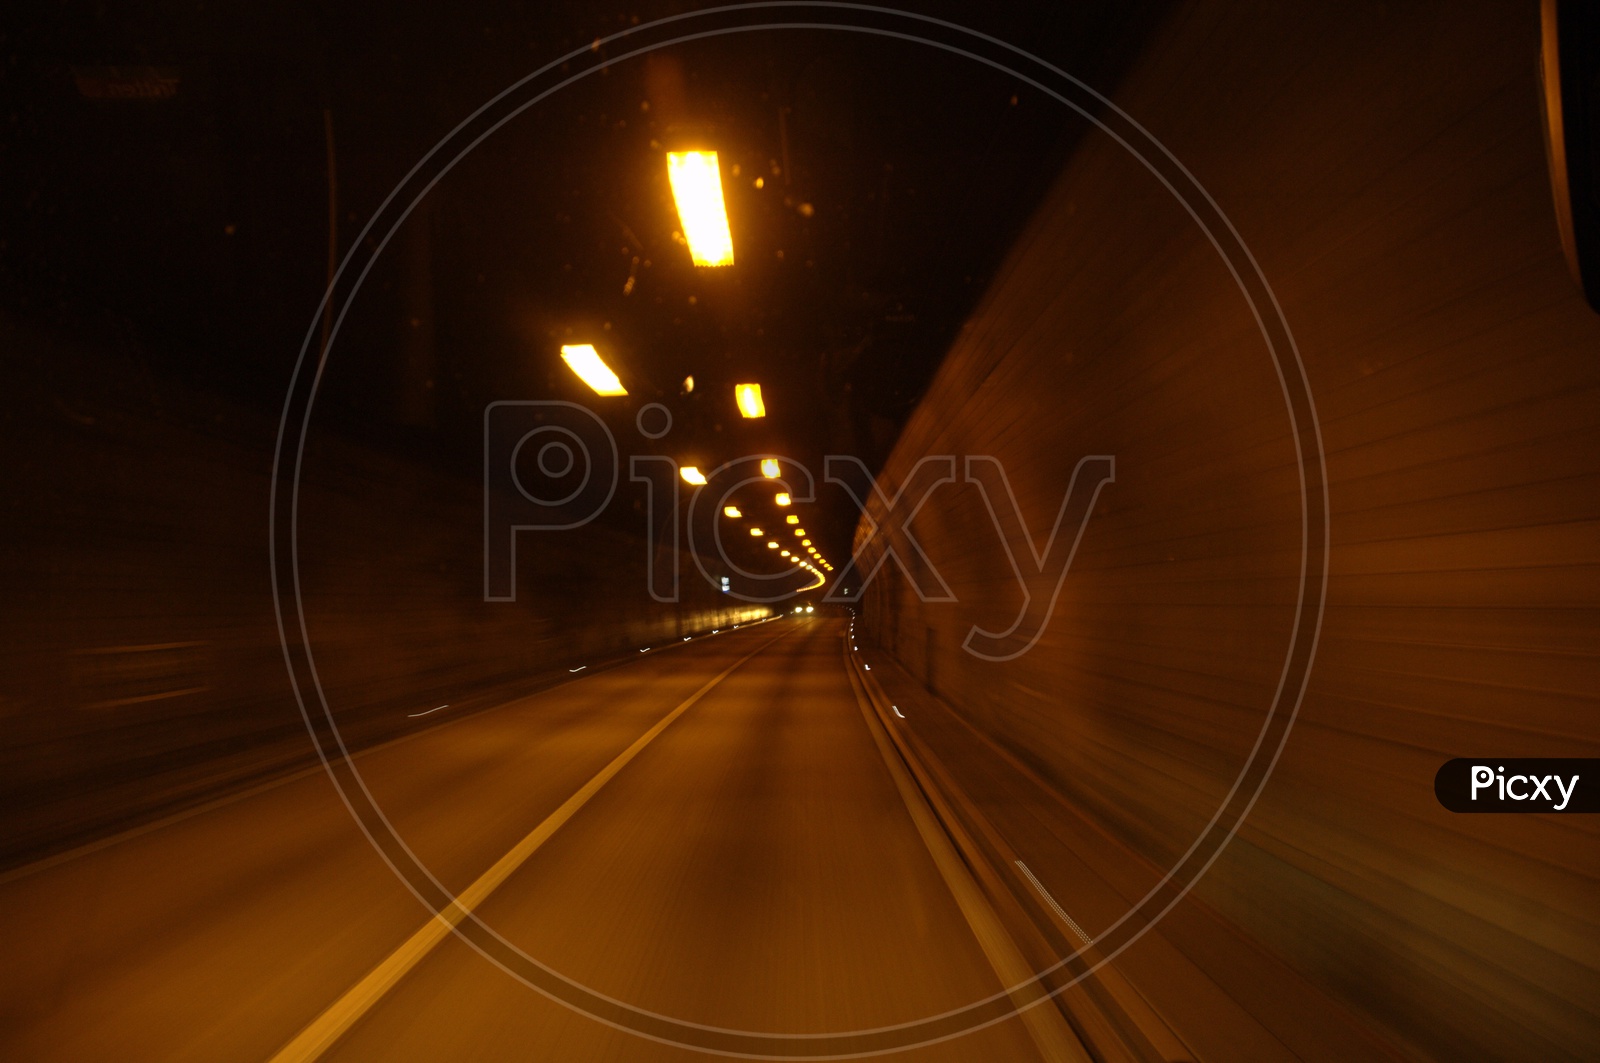 Lights of a Tunnel road